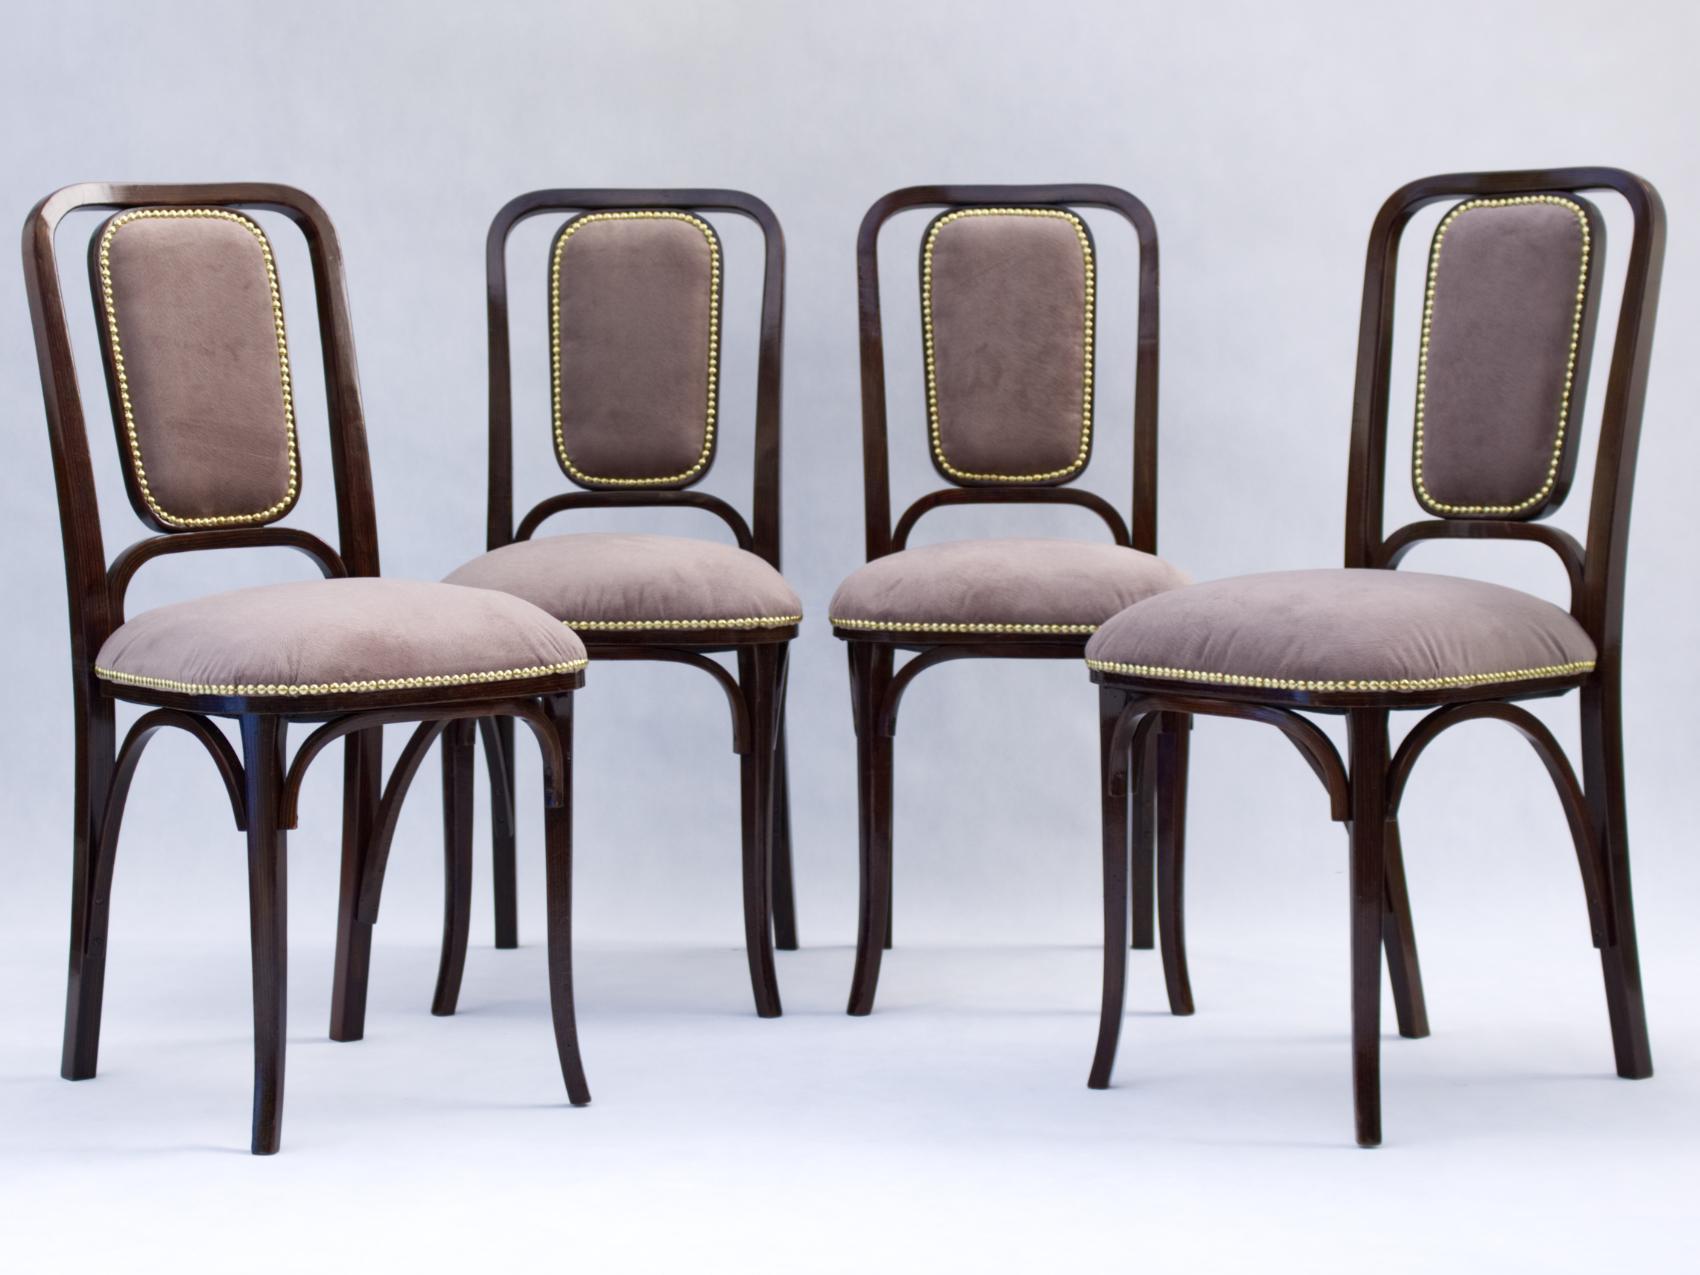 Art Noveau Bentwood Chairs, Early 20th Century, Circa 1905 For Sale 3